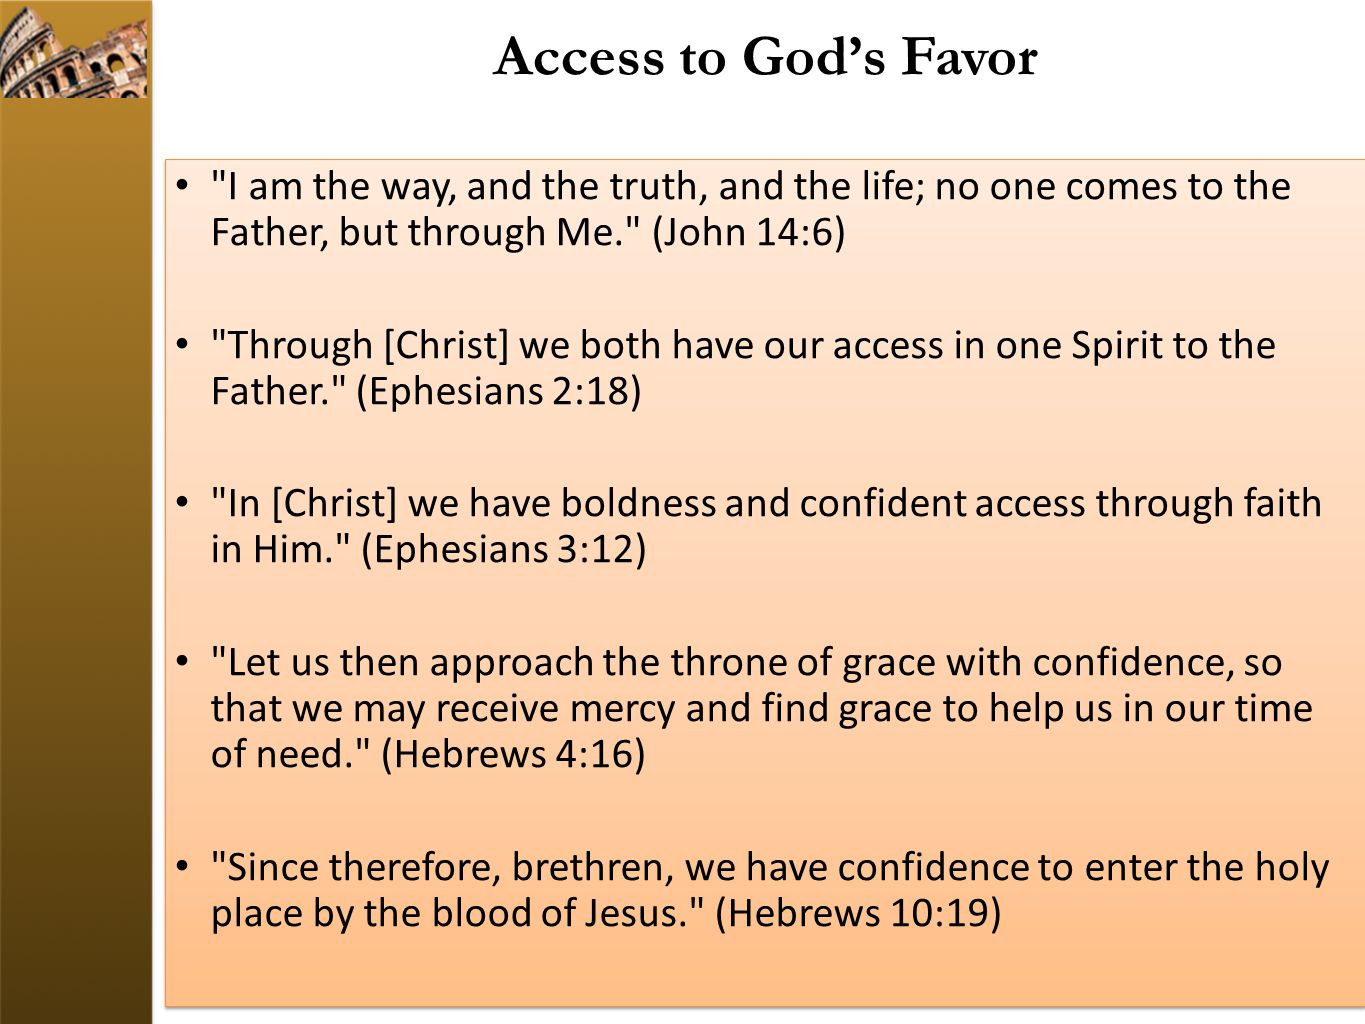 Access to God’s Favor I am the way, and the truth, and the life; no one comes to the Father, but through Me. (John 14:6) Through [Christ] we both have our access in one Spirit to the Father. (Ephesians 2:18) In [Christ] we have boldness and confident access through faith in Him. (Ephesians 3:12) Let us then approach the throne of grace with confidence, so that we may receive mercy and find grace to help us in our time of need. (Hebrews 4:16) Since therefore, brethren, we have confidence to enter the holy place by the blood of Jesus. (Hebrews 10:19) I am the way, and the truth, and the life; no one comes to the Father, but through Me. (John 14:6) Through [Christ] we both have our access in one Spirit to the Father. (Ephesians 2:18) In [Christ] we have boldness and confident access through faith in Him. (Ephesians 3:12) Let us then approach the throne of grace with confidence, so that we may receive mercy and find grace to help us in our time of need. (Hebrews 4:16) Since therefore, brethren, we have confidence to enter the holy place by the blood of Jesus. (Hebrews 10:19)